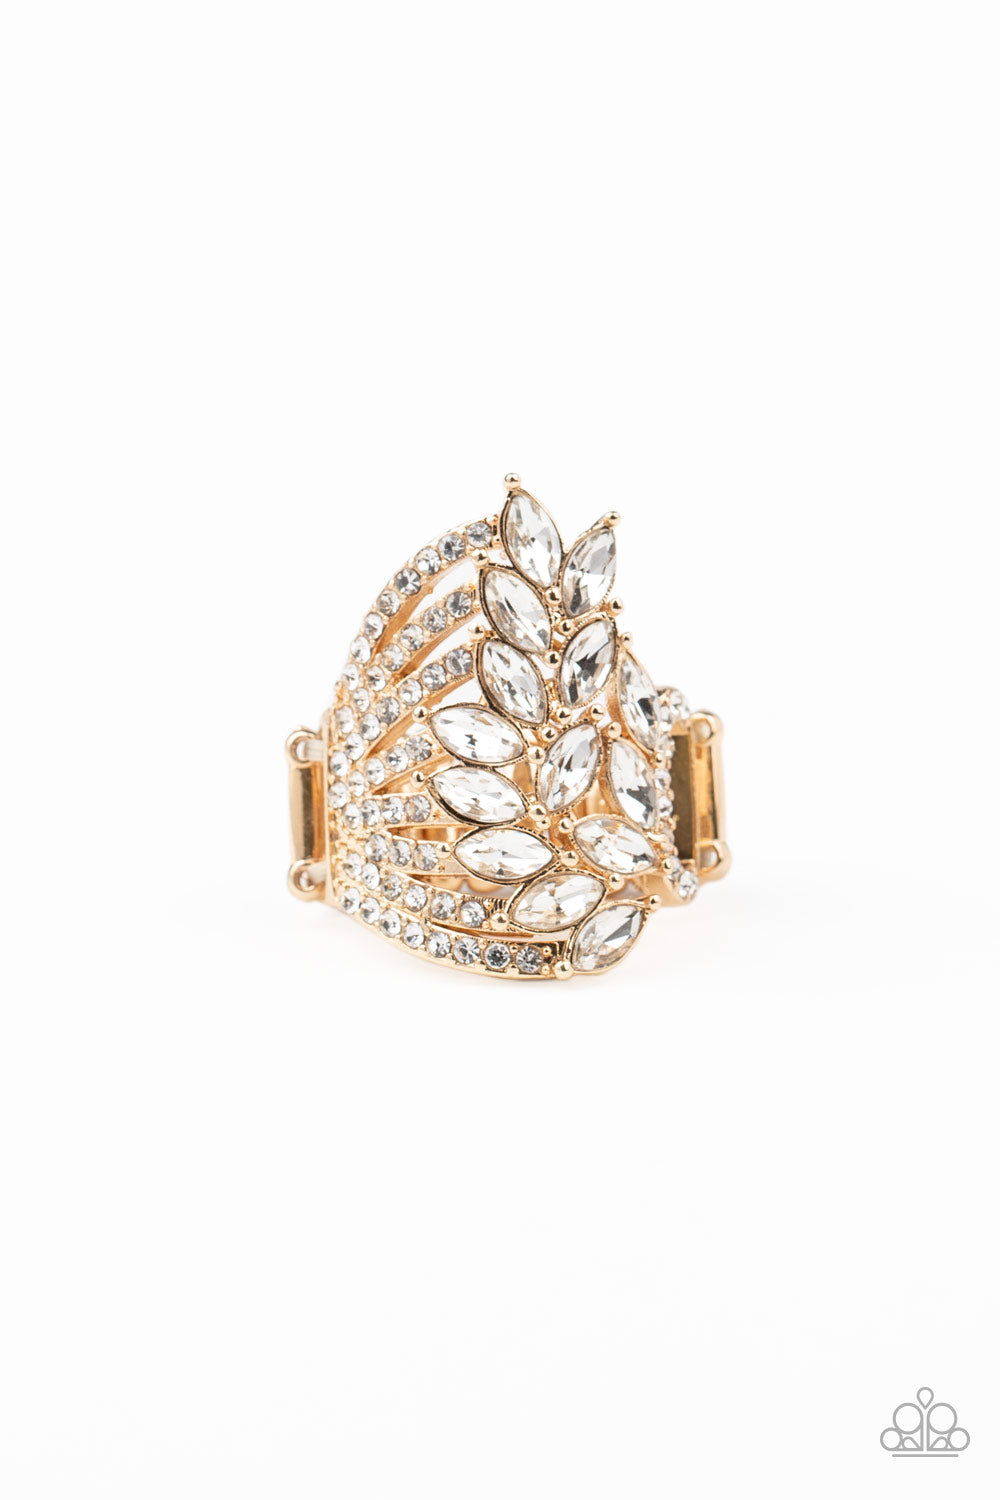 Attached to white rhinestone encrusted gold bands, a cascade of white marquise cut rhinestones fans across the finger, coalescing into a gorgeous statement maker. Features a stretchy band for a flexible fit.